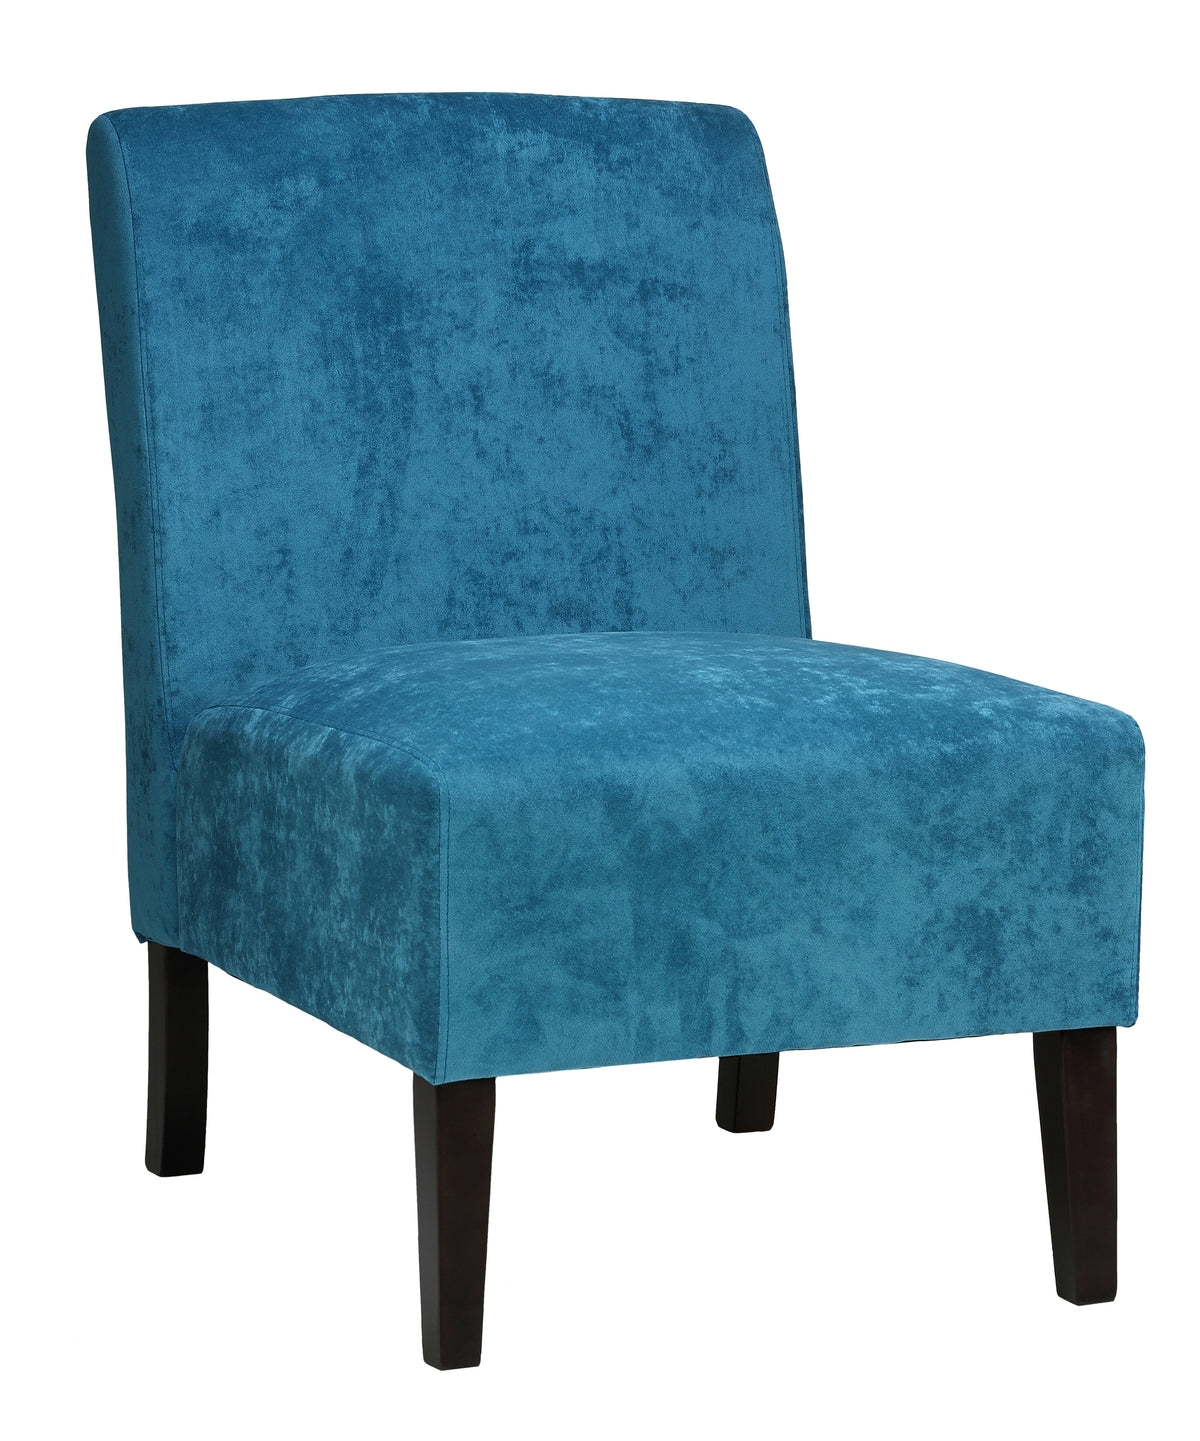 Cortesi Home Chicco Blue Armless Accent Chair